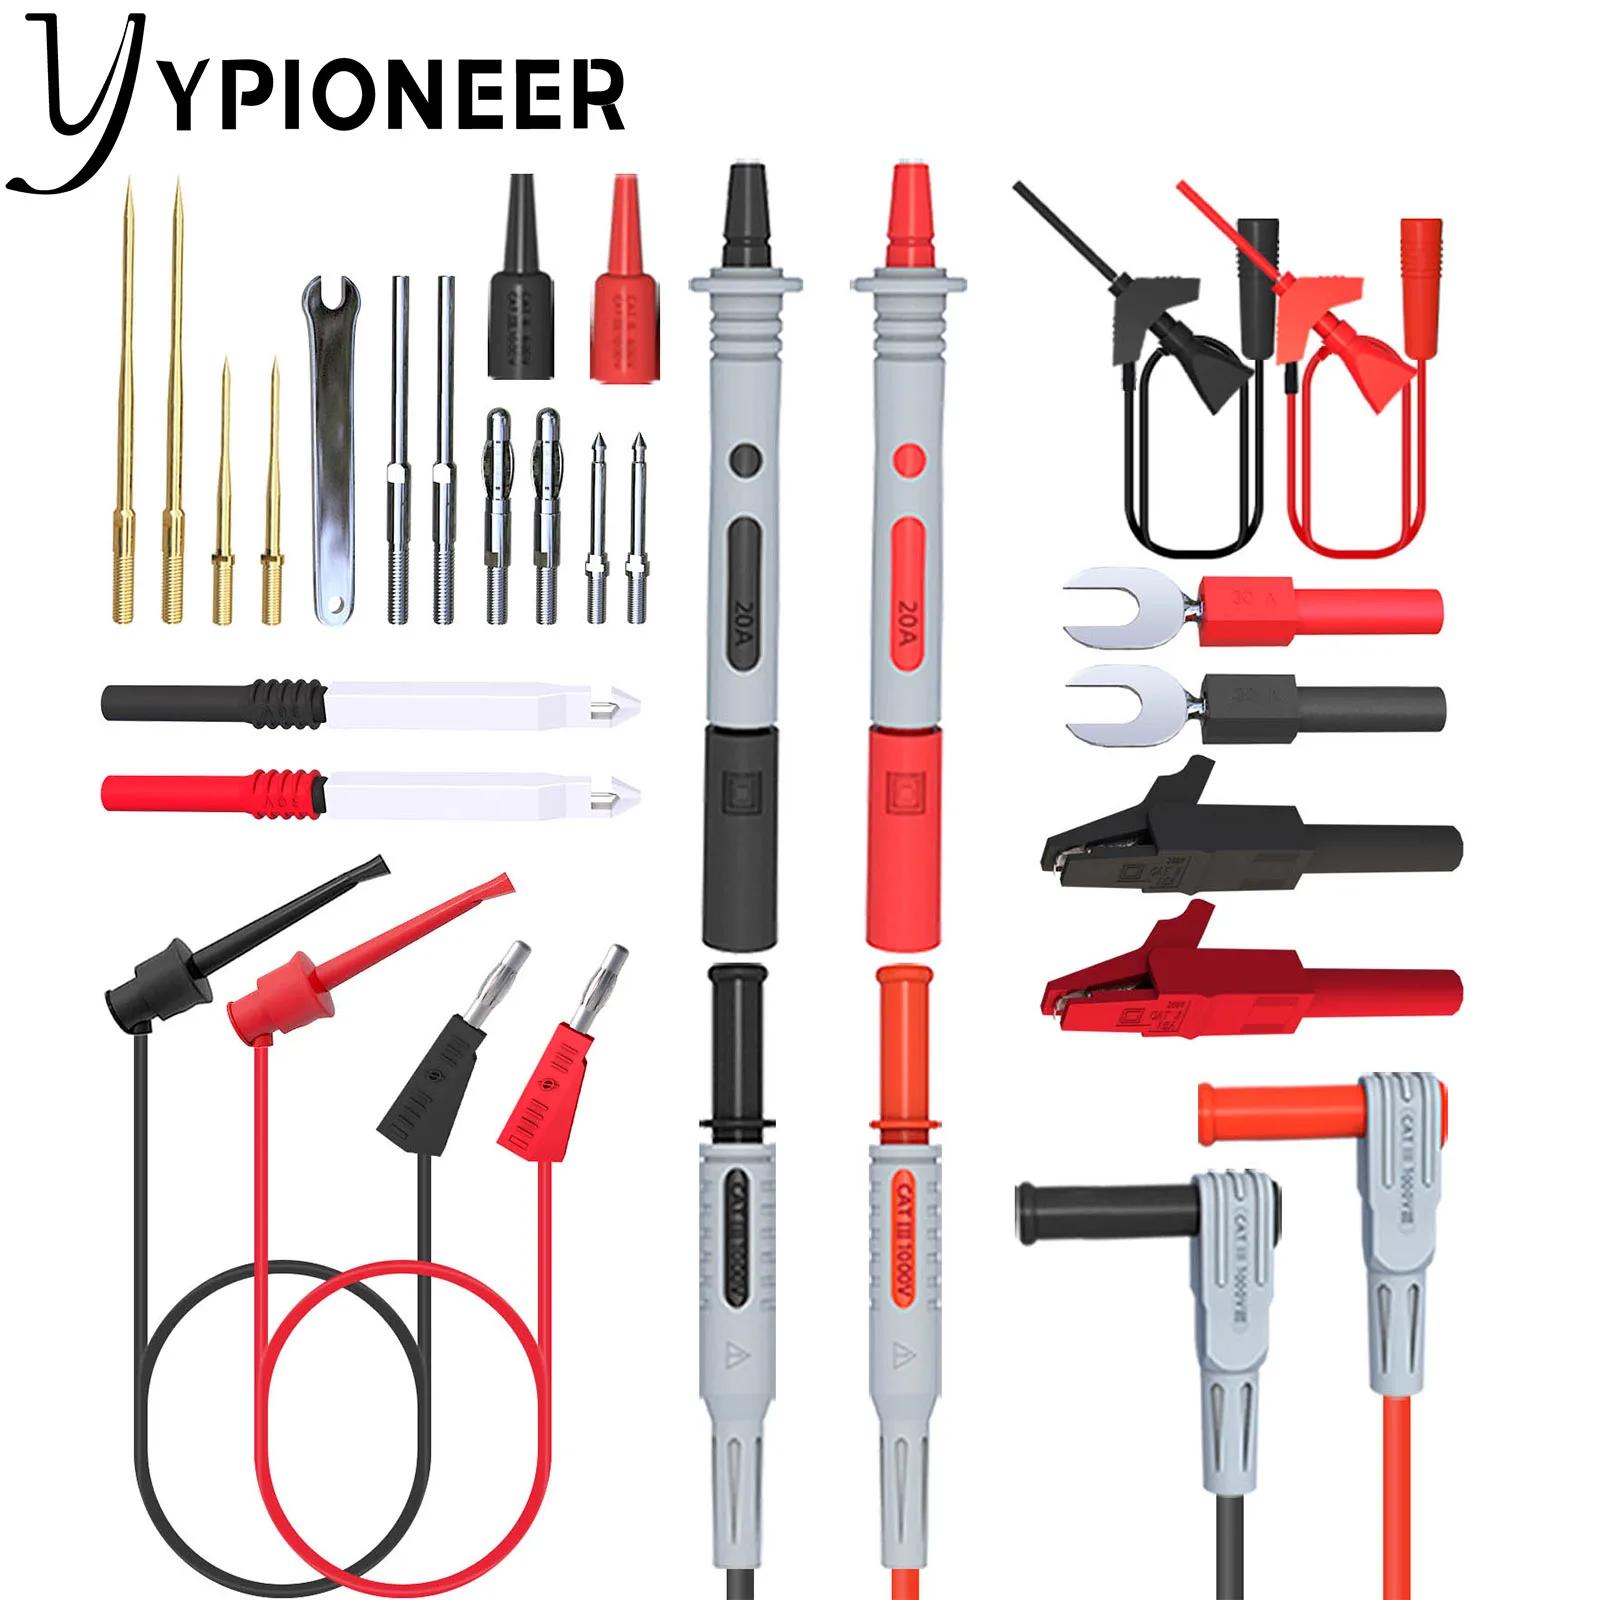 YPioneer P1308D Silicone Multimeter Test Leads Kit Replaceable Gold-Plated Precision Sharp Probe Set Alligator Clip Minigrabber